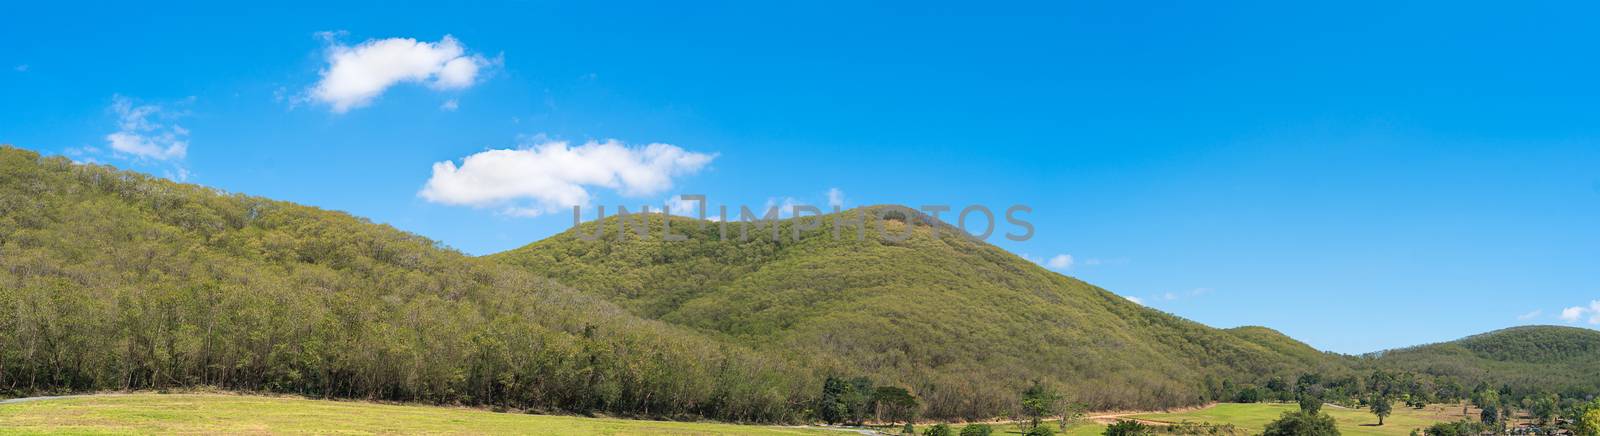 Panorama landscape view of mountain agent blue sky  in countryside Thailand